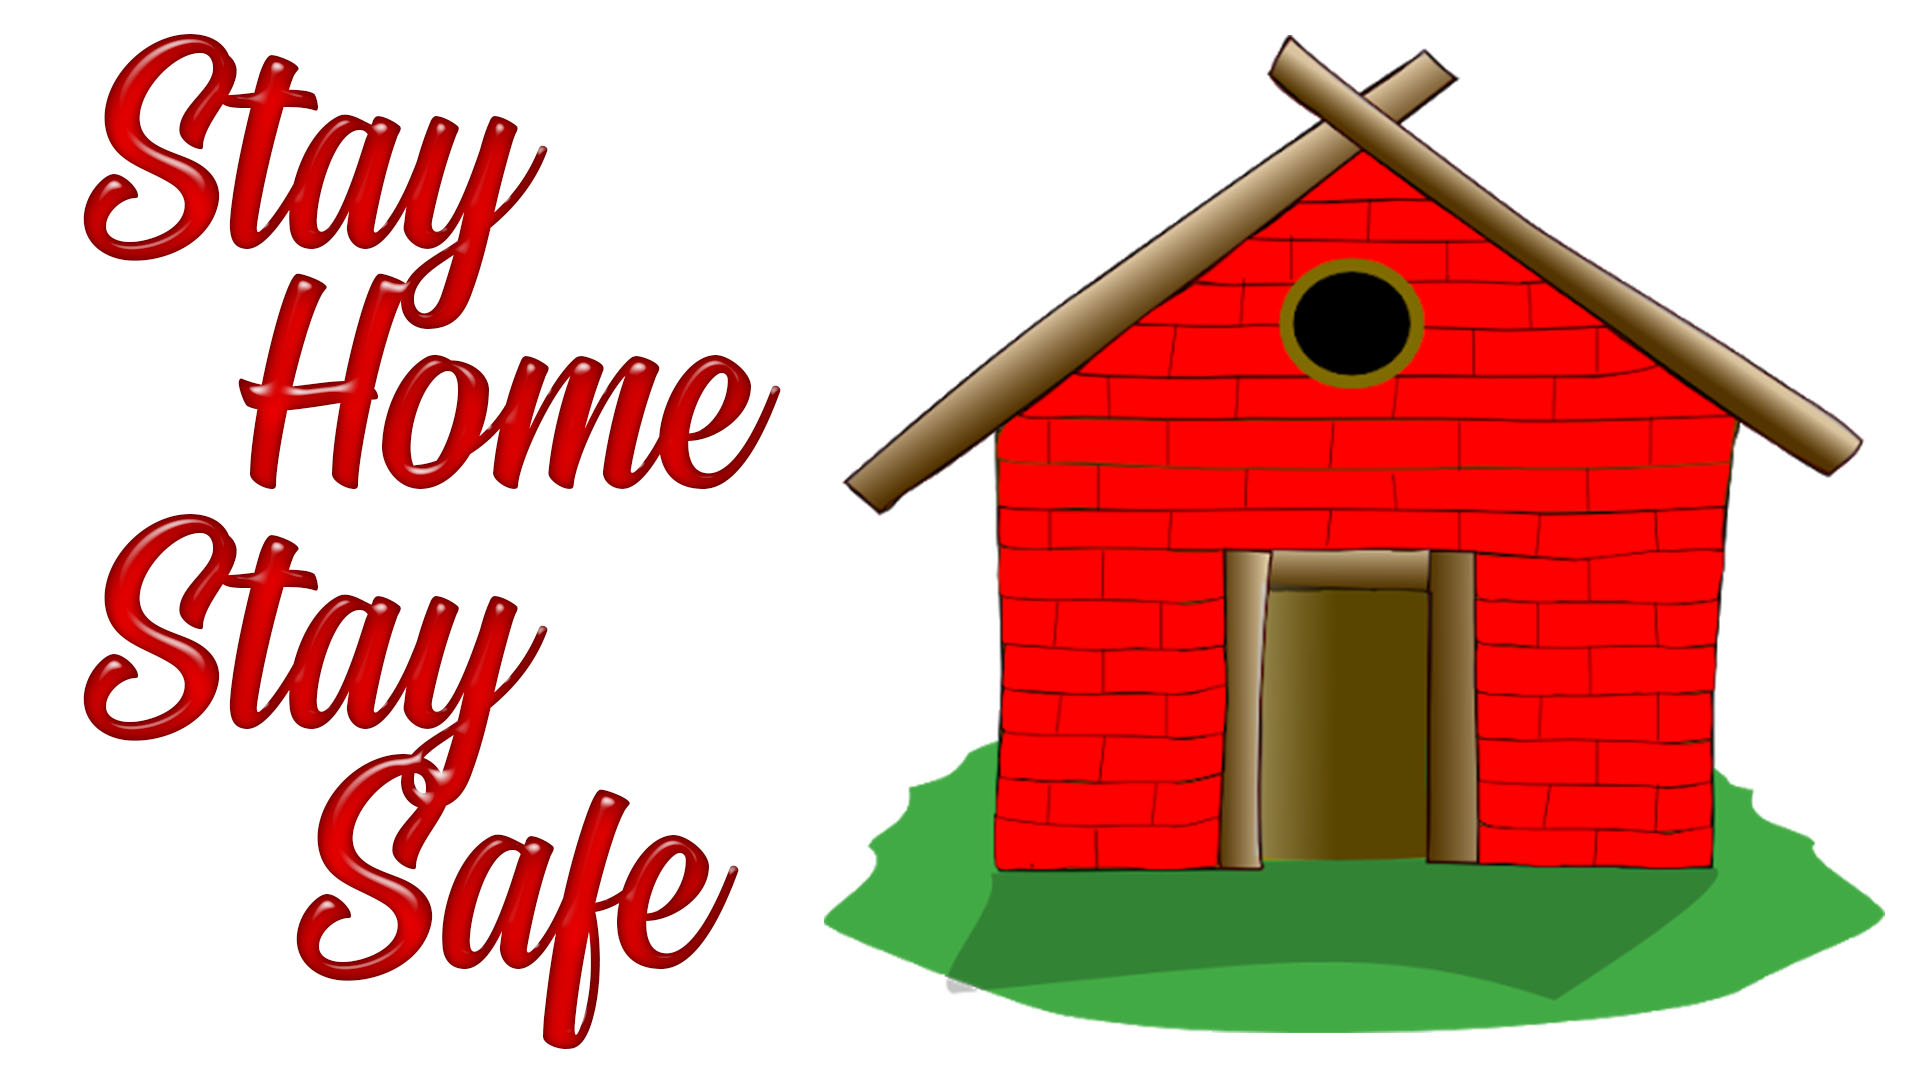 stay home stay safe image